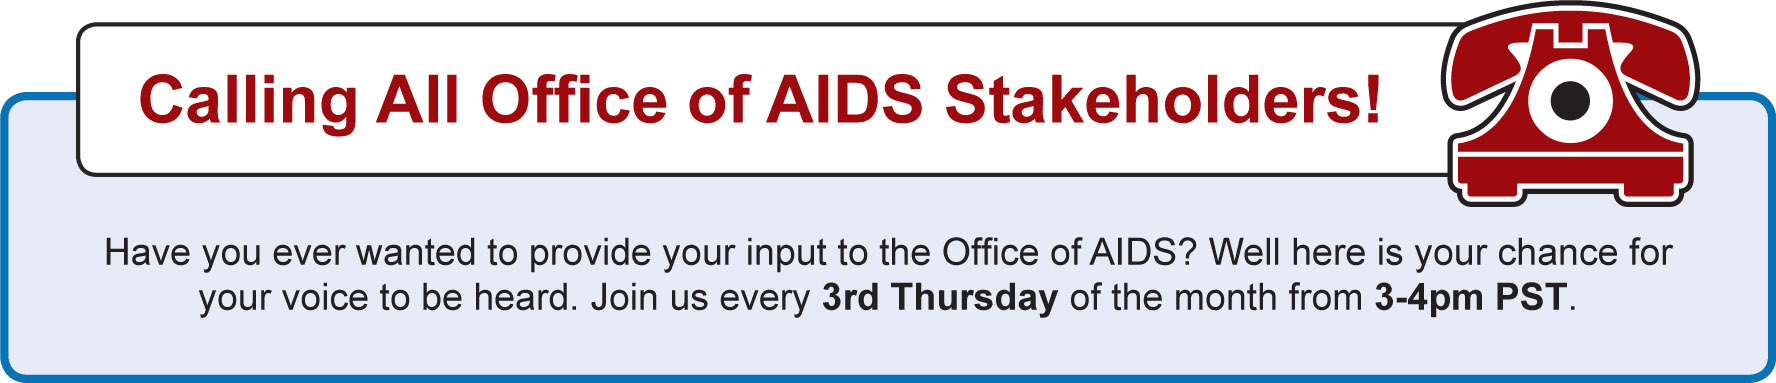 Calling all Office of AIDS Stakeholders. Join us every 3rd Thursday of the month from 3-4pm PST